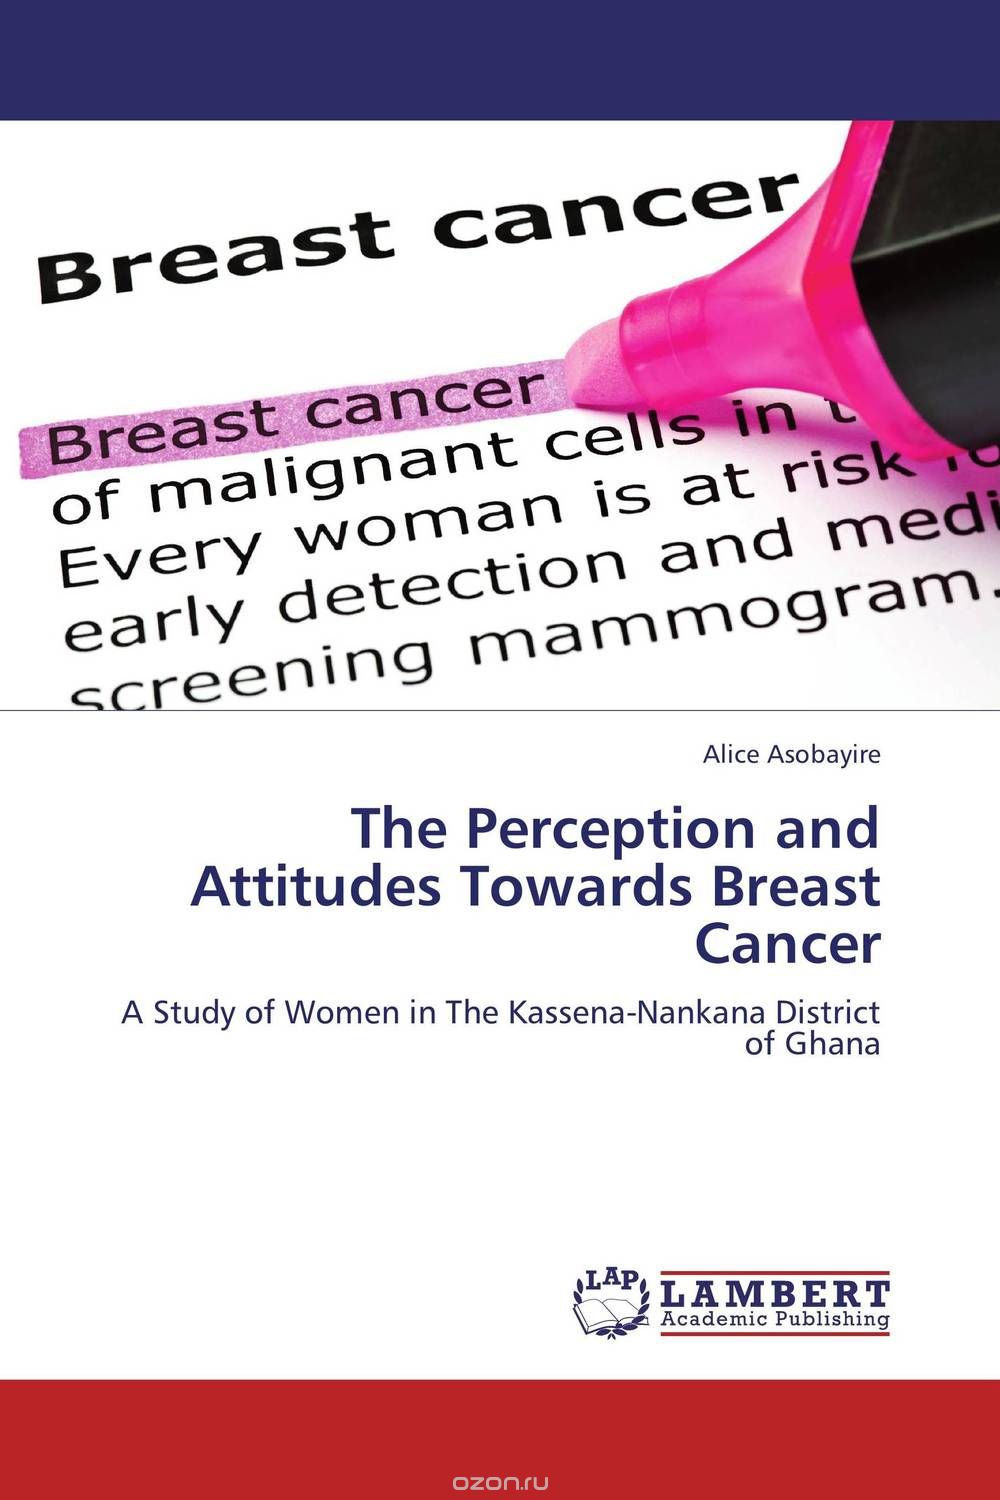 The Perception and Attitudes Towards Breast Cancer